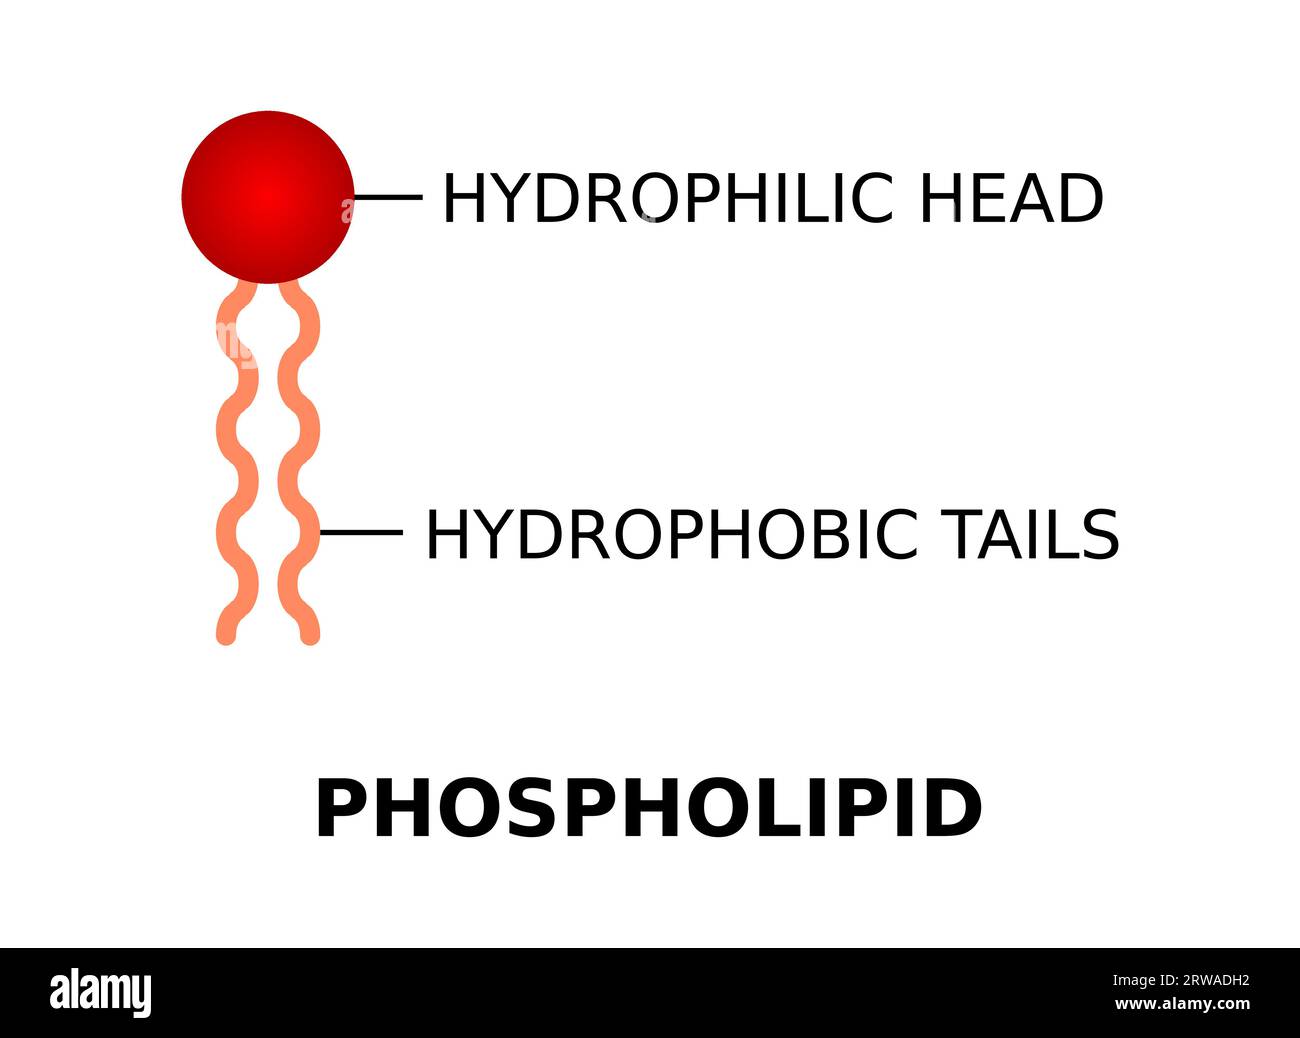 Phospholipid with hydrophilic head and hydrophobic tails. Phospholipid molecule structure. Cell membrane component. They form lipid bilayers. Vector Stock Vector